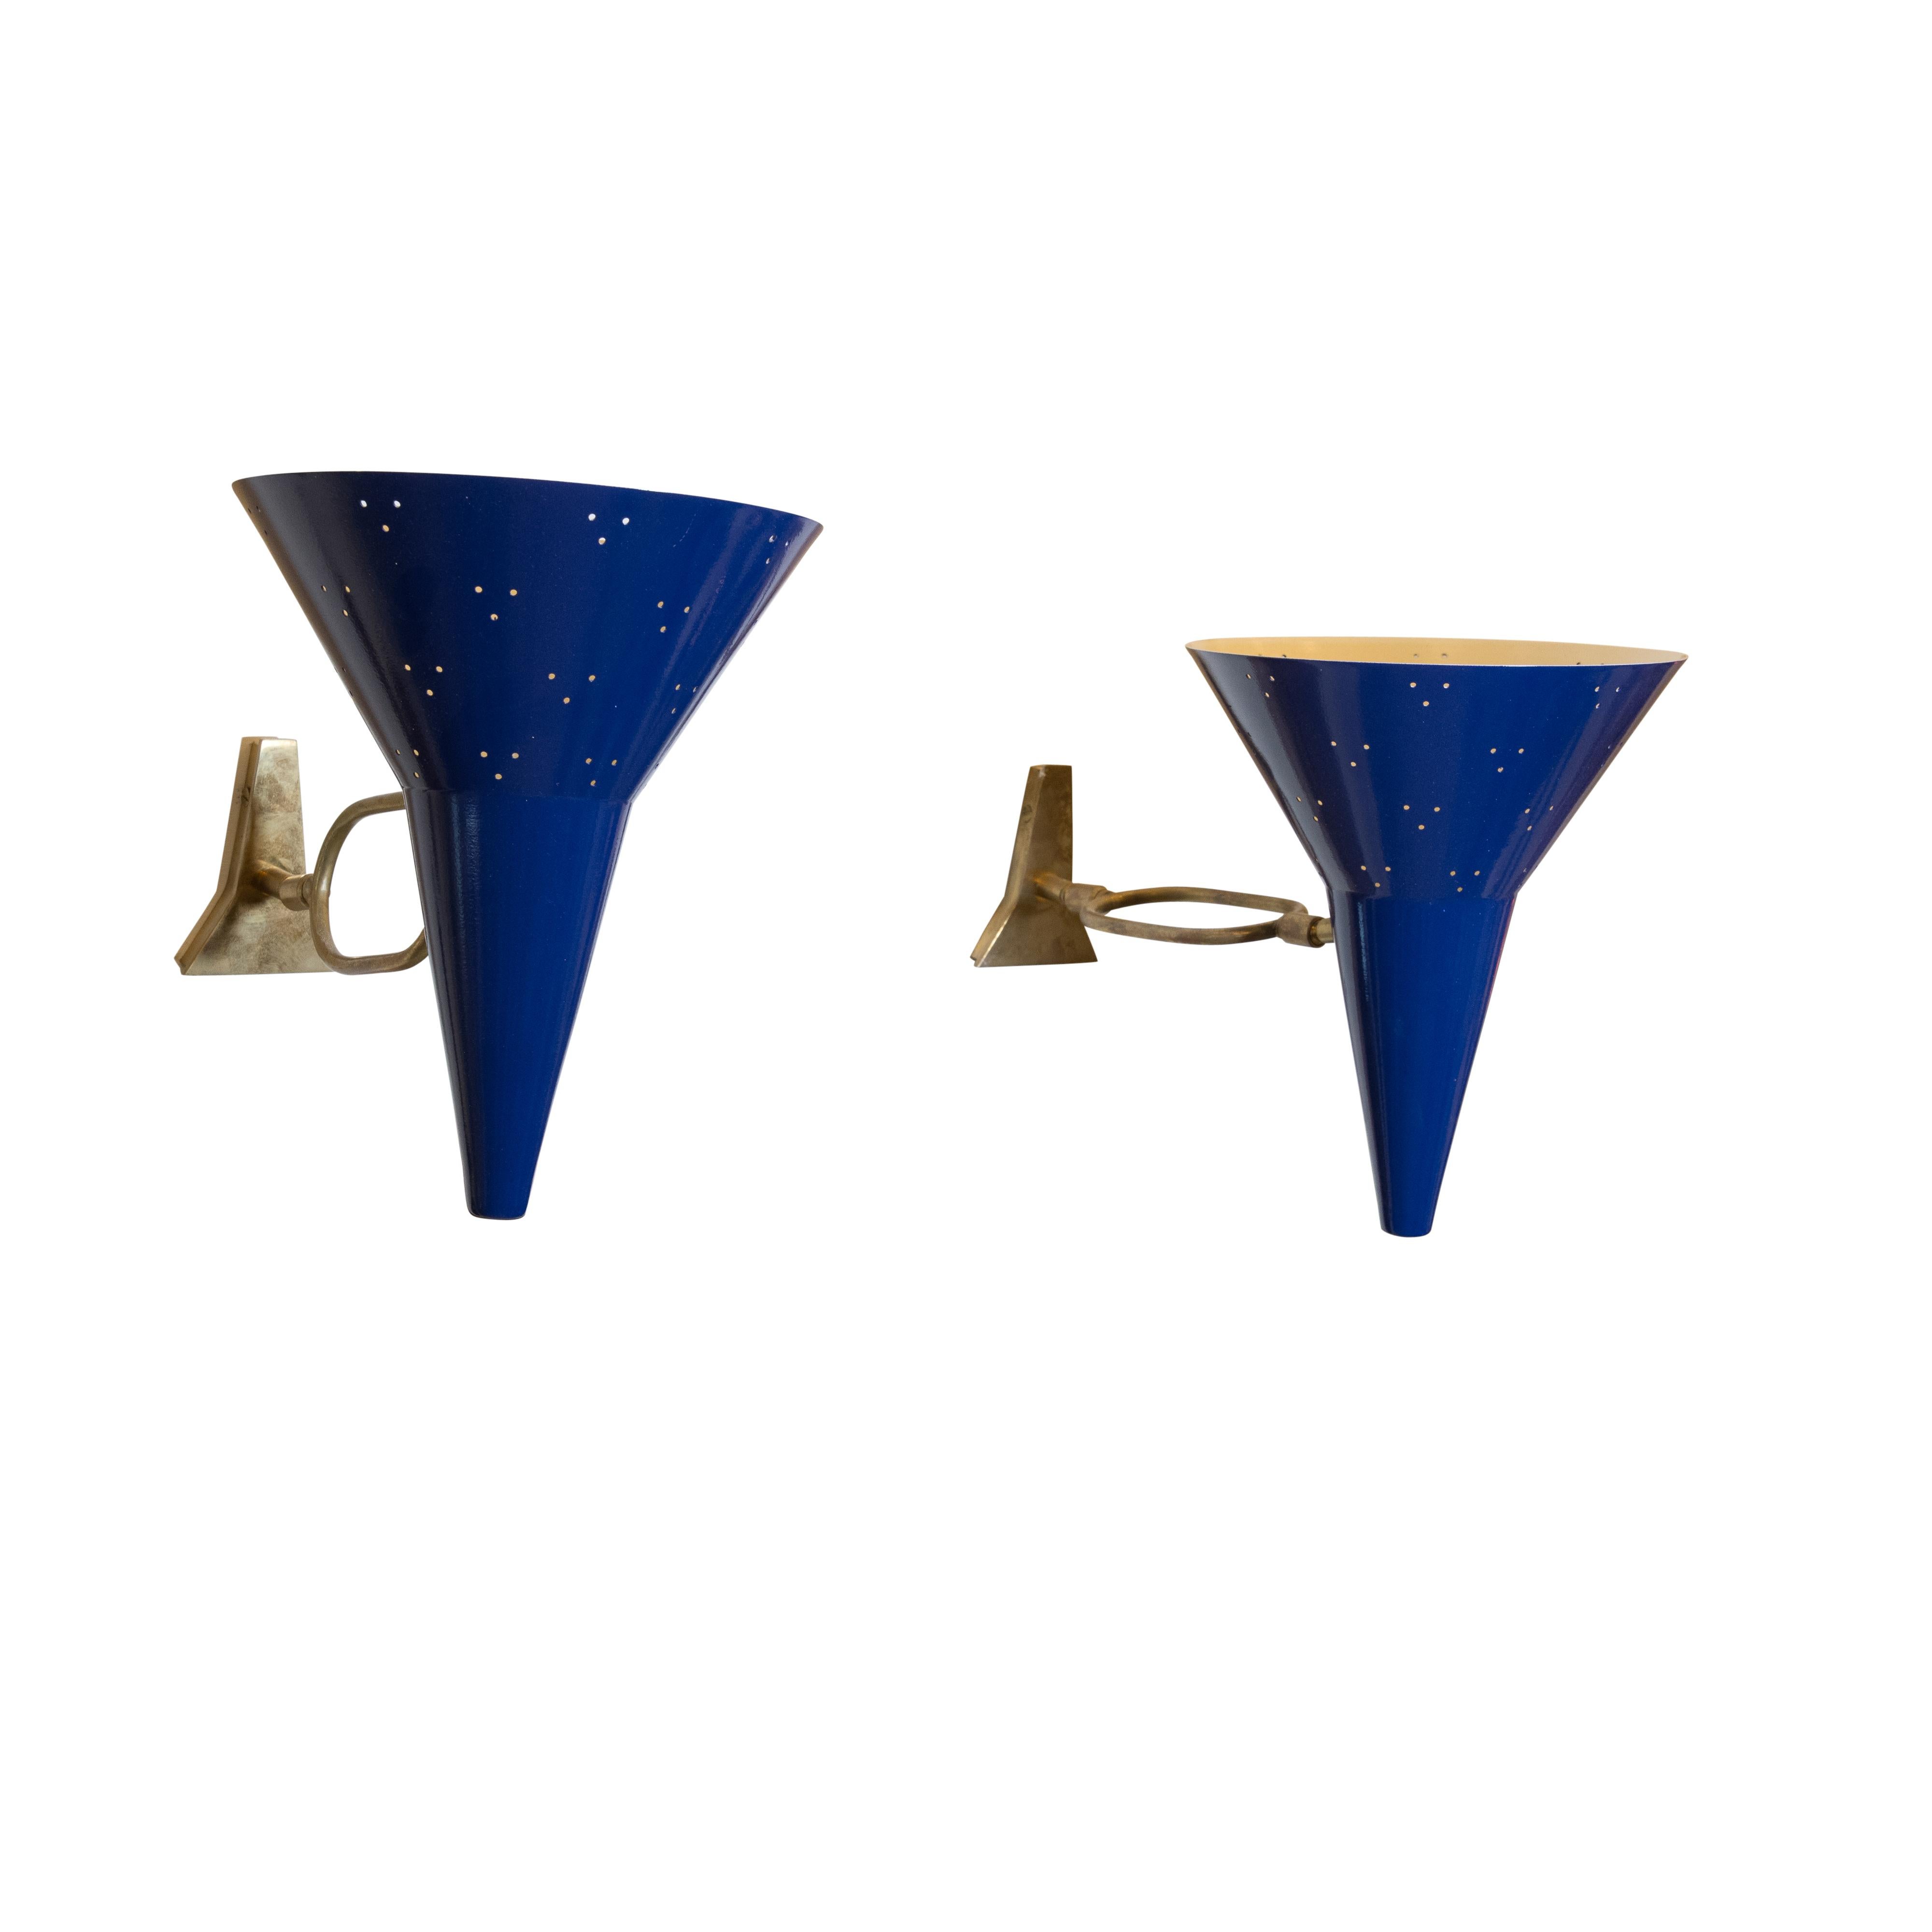 Aluminum 1960s Pair of Italian Wall Lights, Blue Articulate Shades and Brass Structure